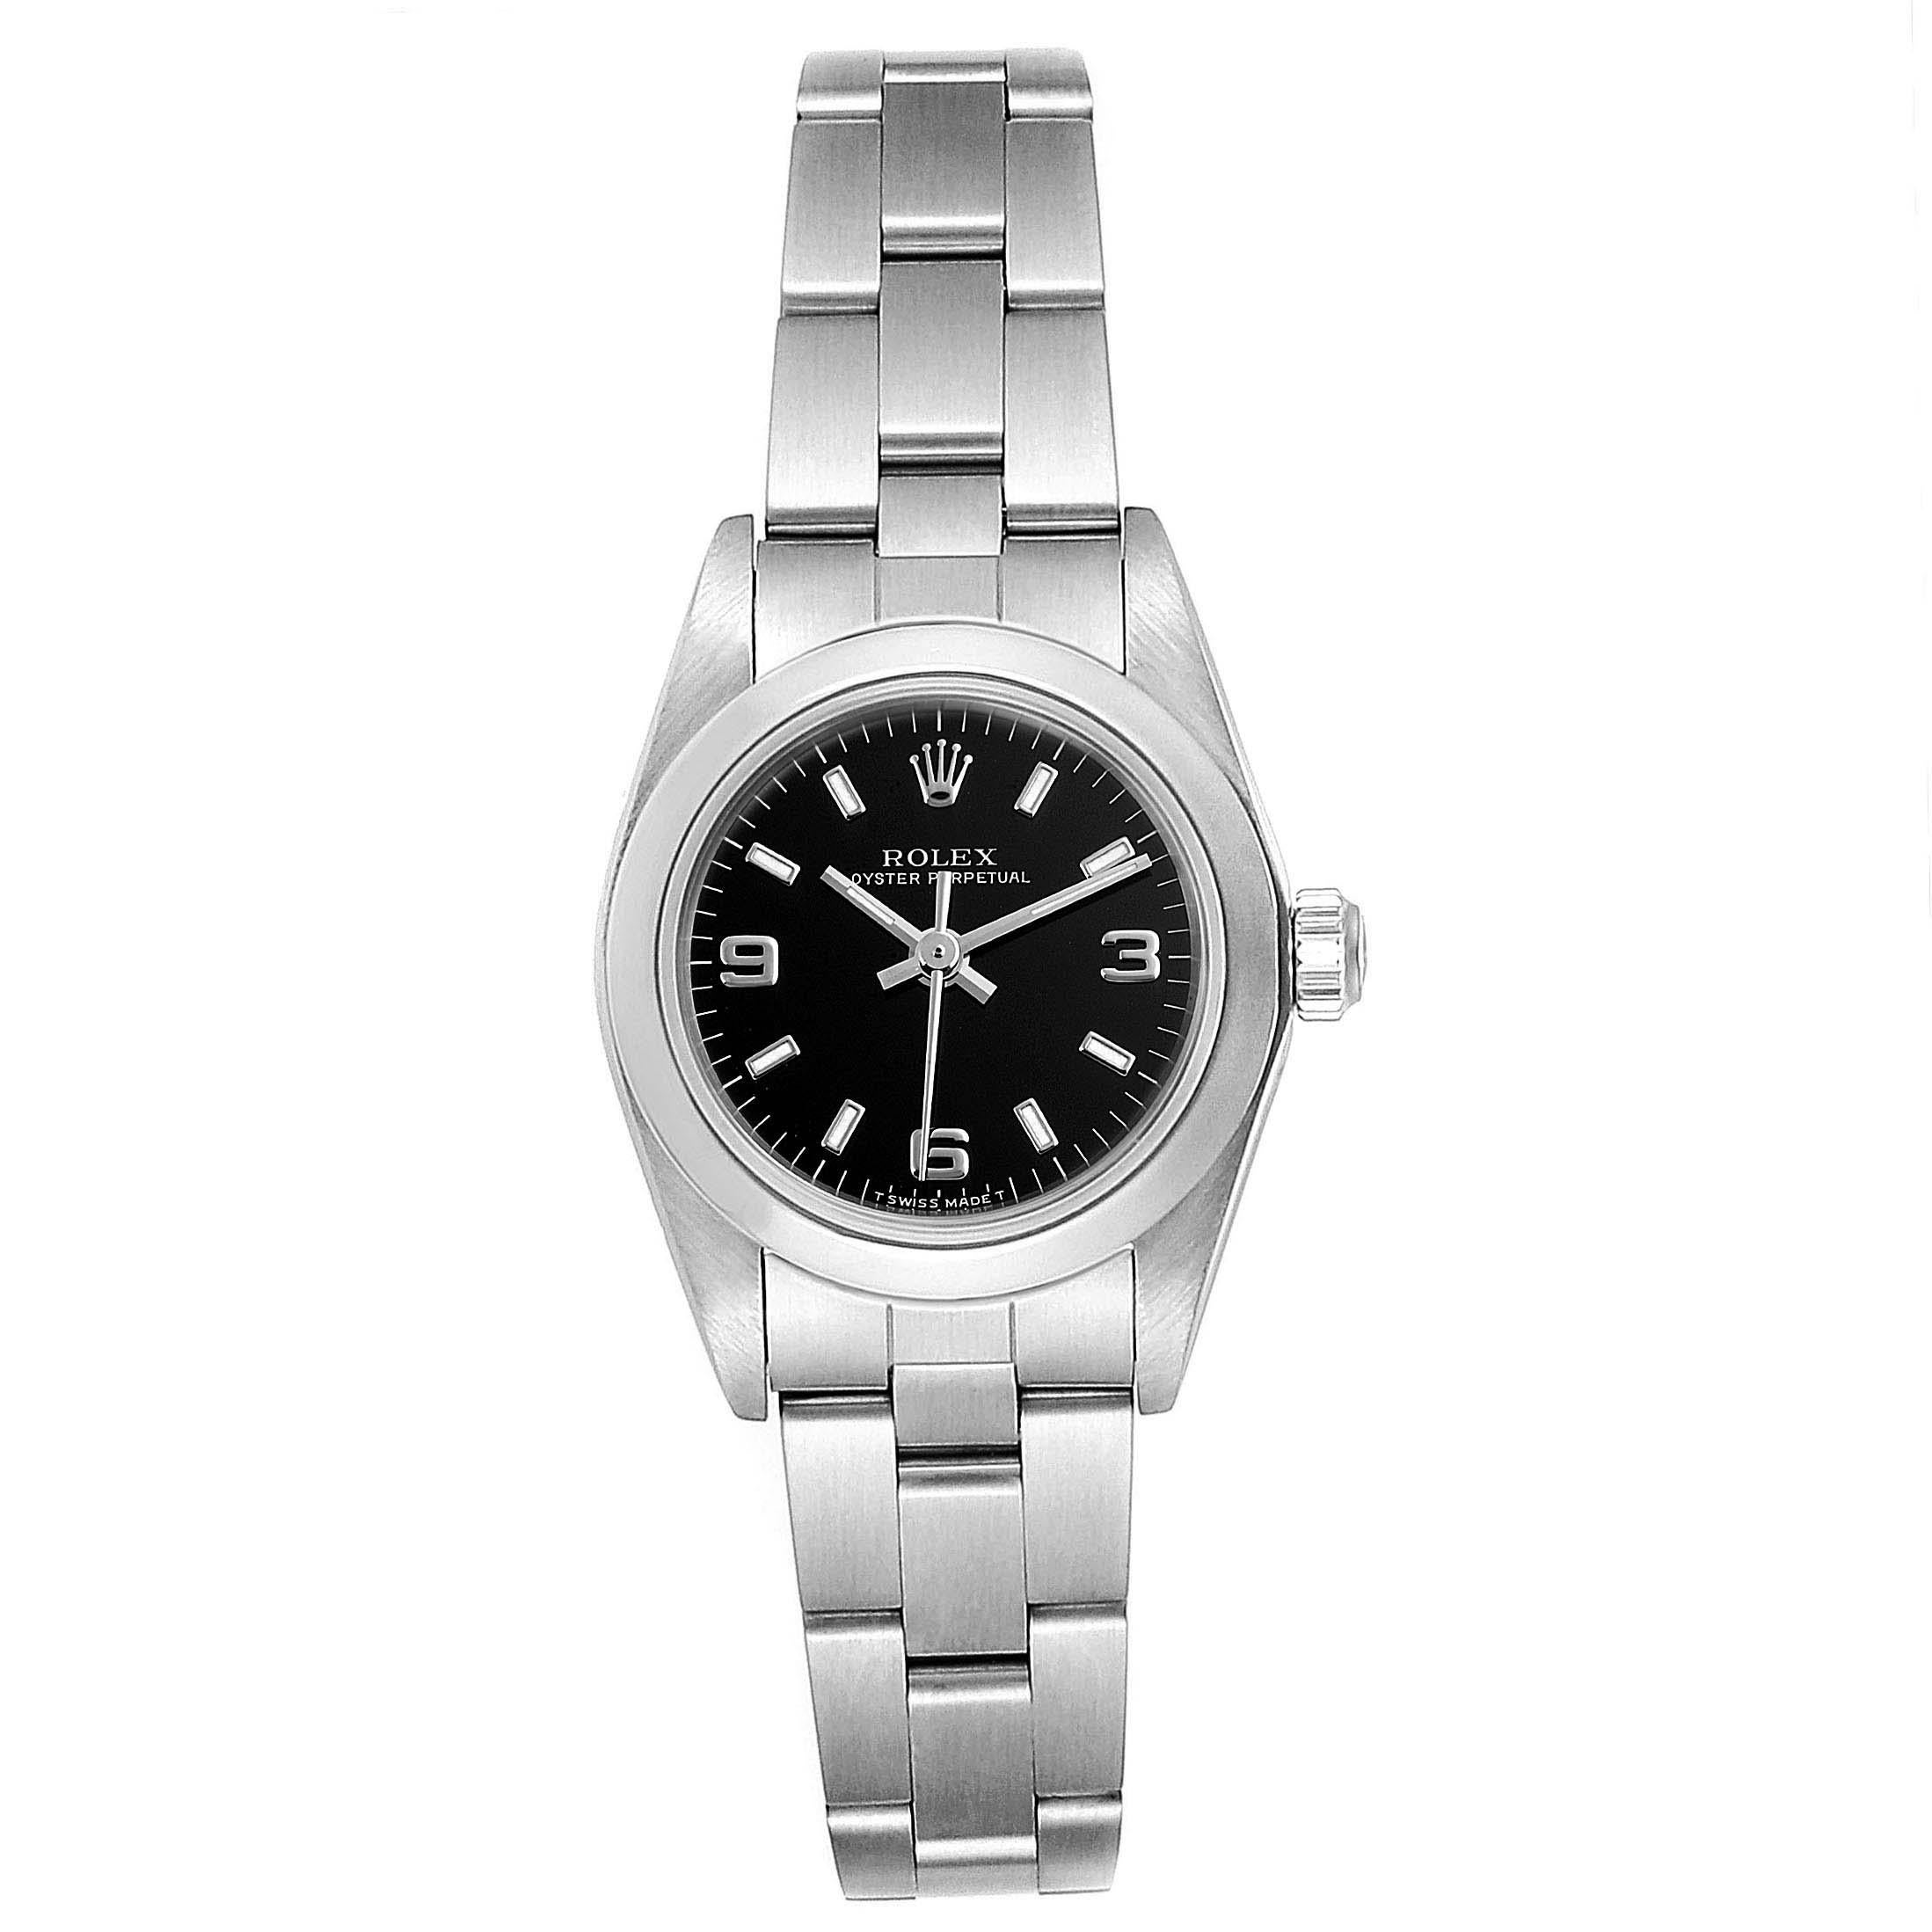 Rolex Oyster Perpetual Steel Black Dial Ladies Watch 67180 Box Papers. Officially certified chronometer self-winding movement. Stainless steel oyster case 24.0 mm in diameter. Rolex logo on a crown. Stainless steel smooth domed bezel. Scratch